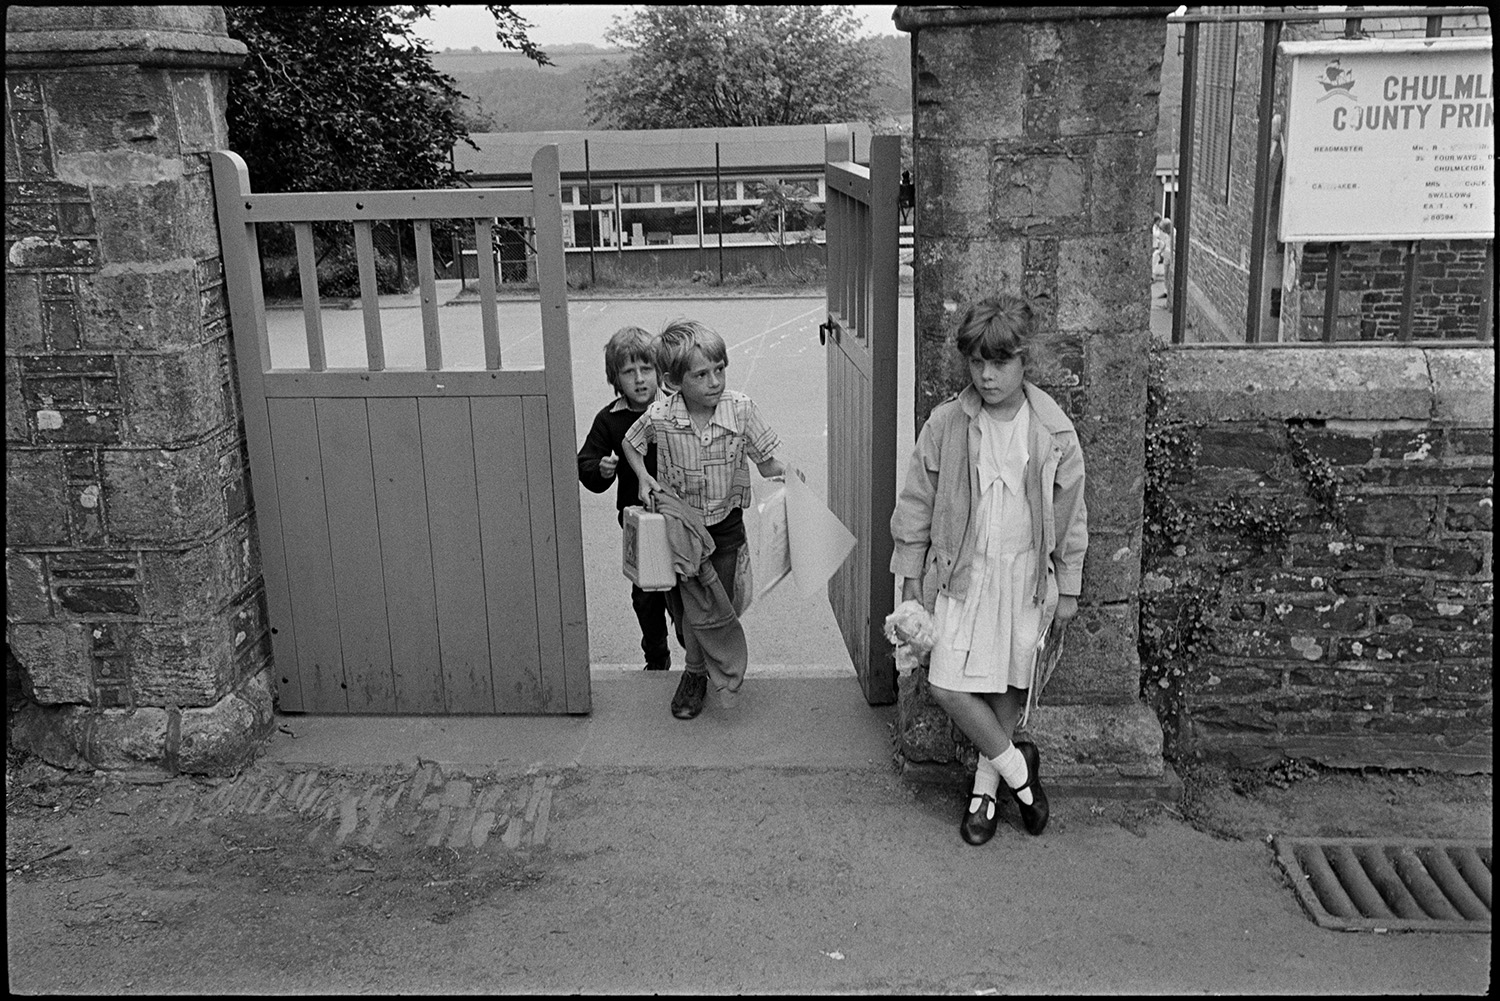 Women, mothers and children after school.
[Two boys leaving school and walking up the steps to the school gate at Chulmleigh Primary School. One of them is carrying pictures and a lunch box. A girl is standing by the wall outside the school.]